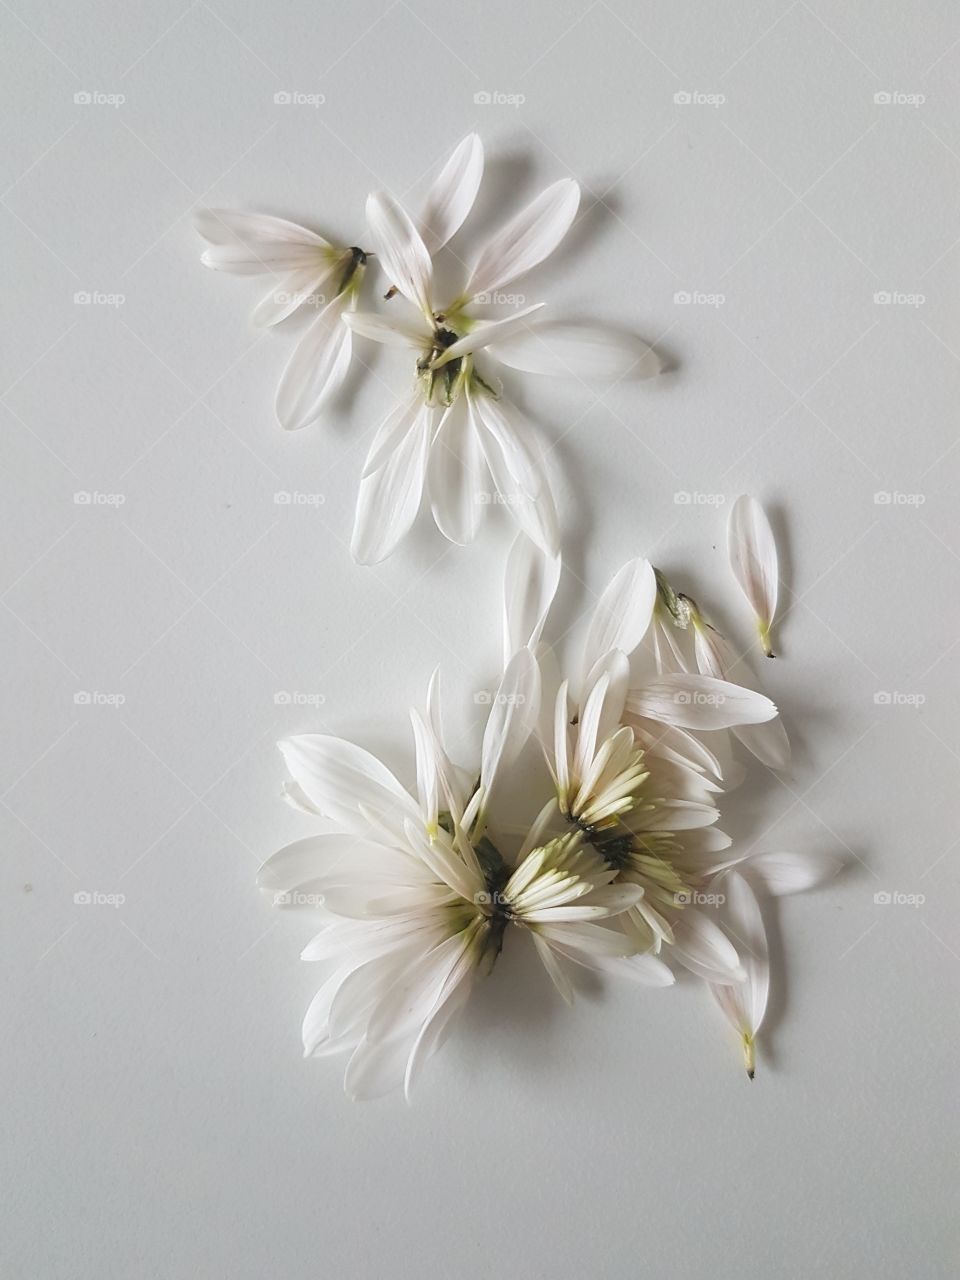 White flower petals on a white background.